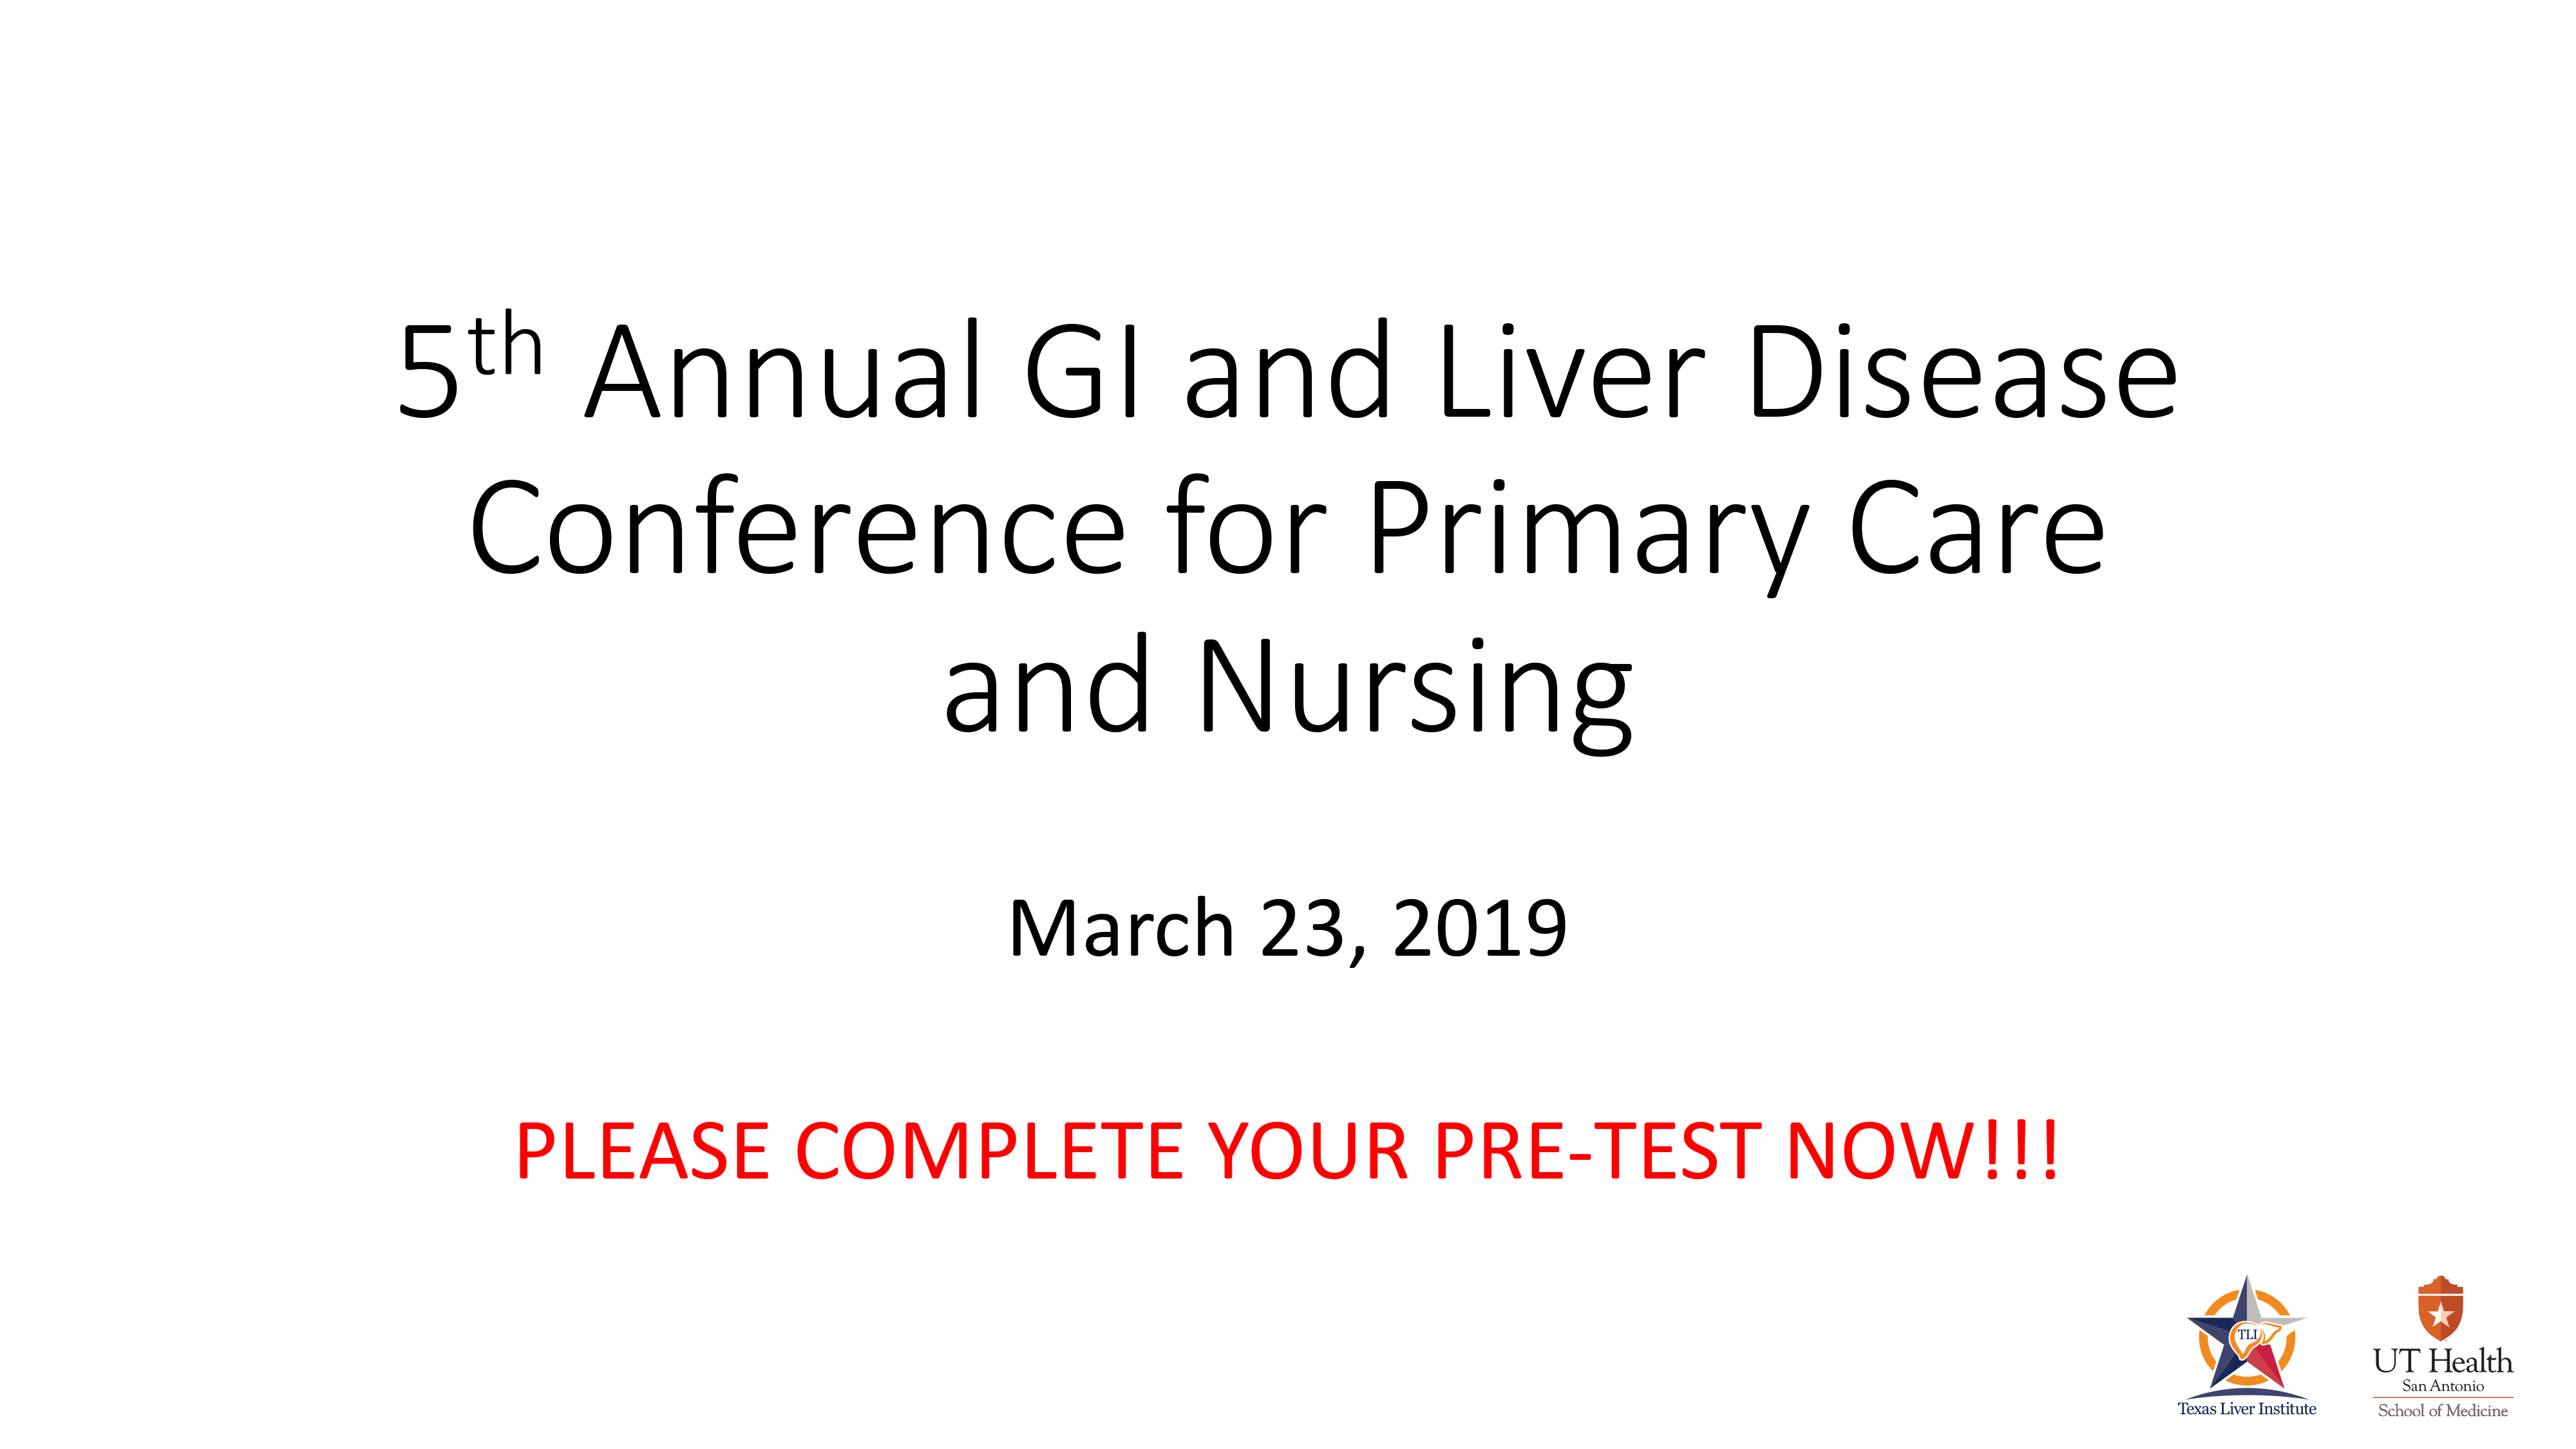 5th Annual GI and Liver Disease Conference for Primary Care and Nursing